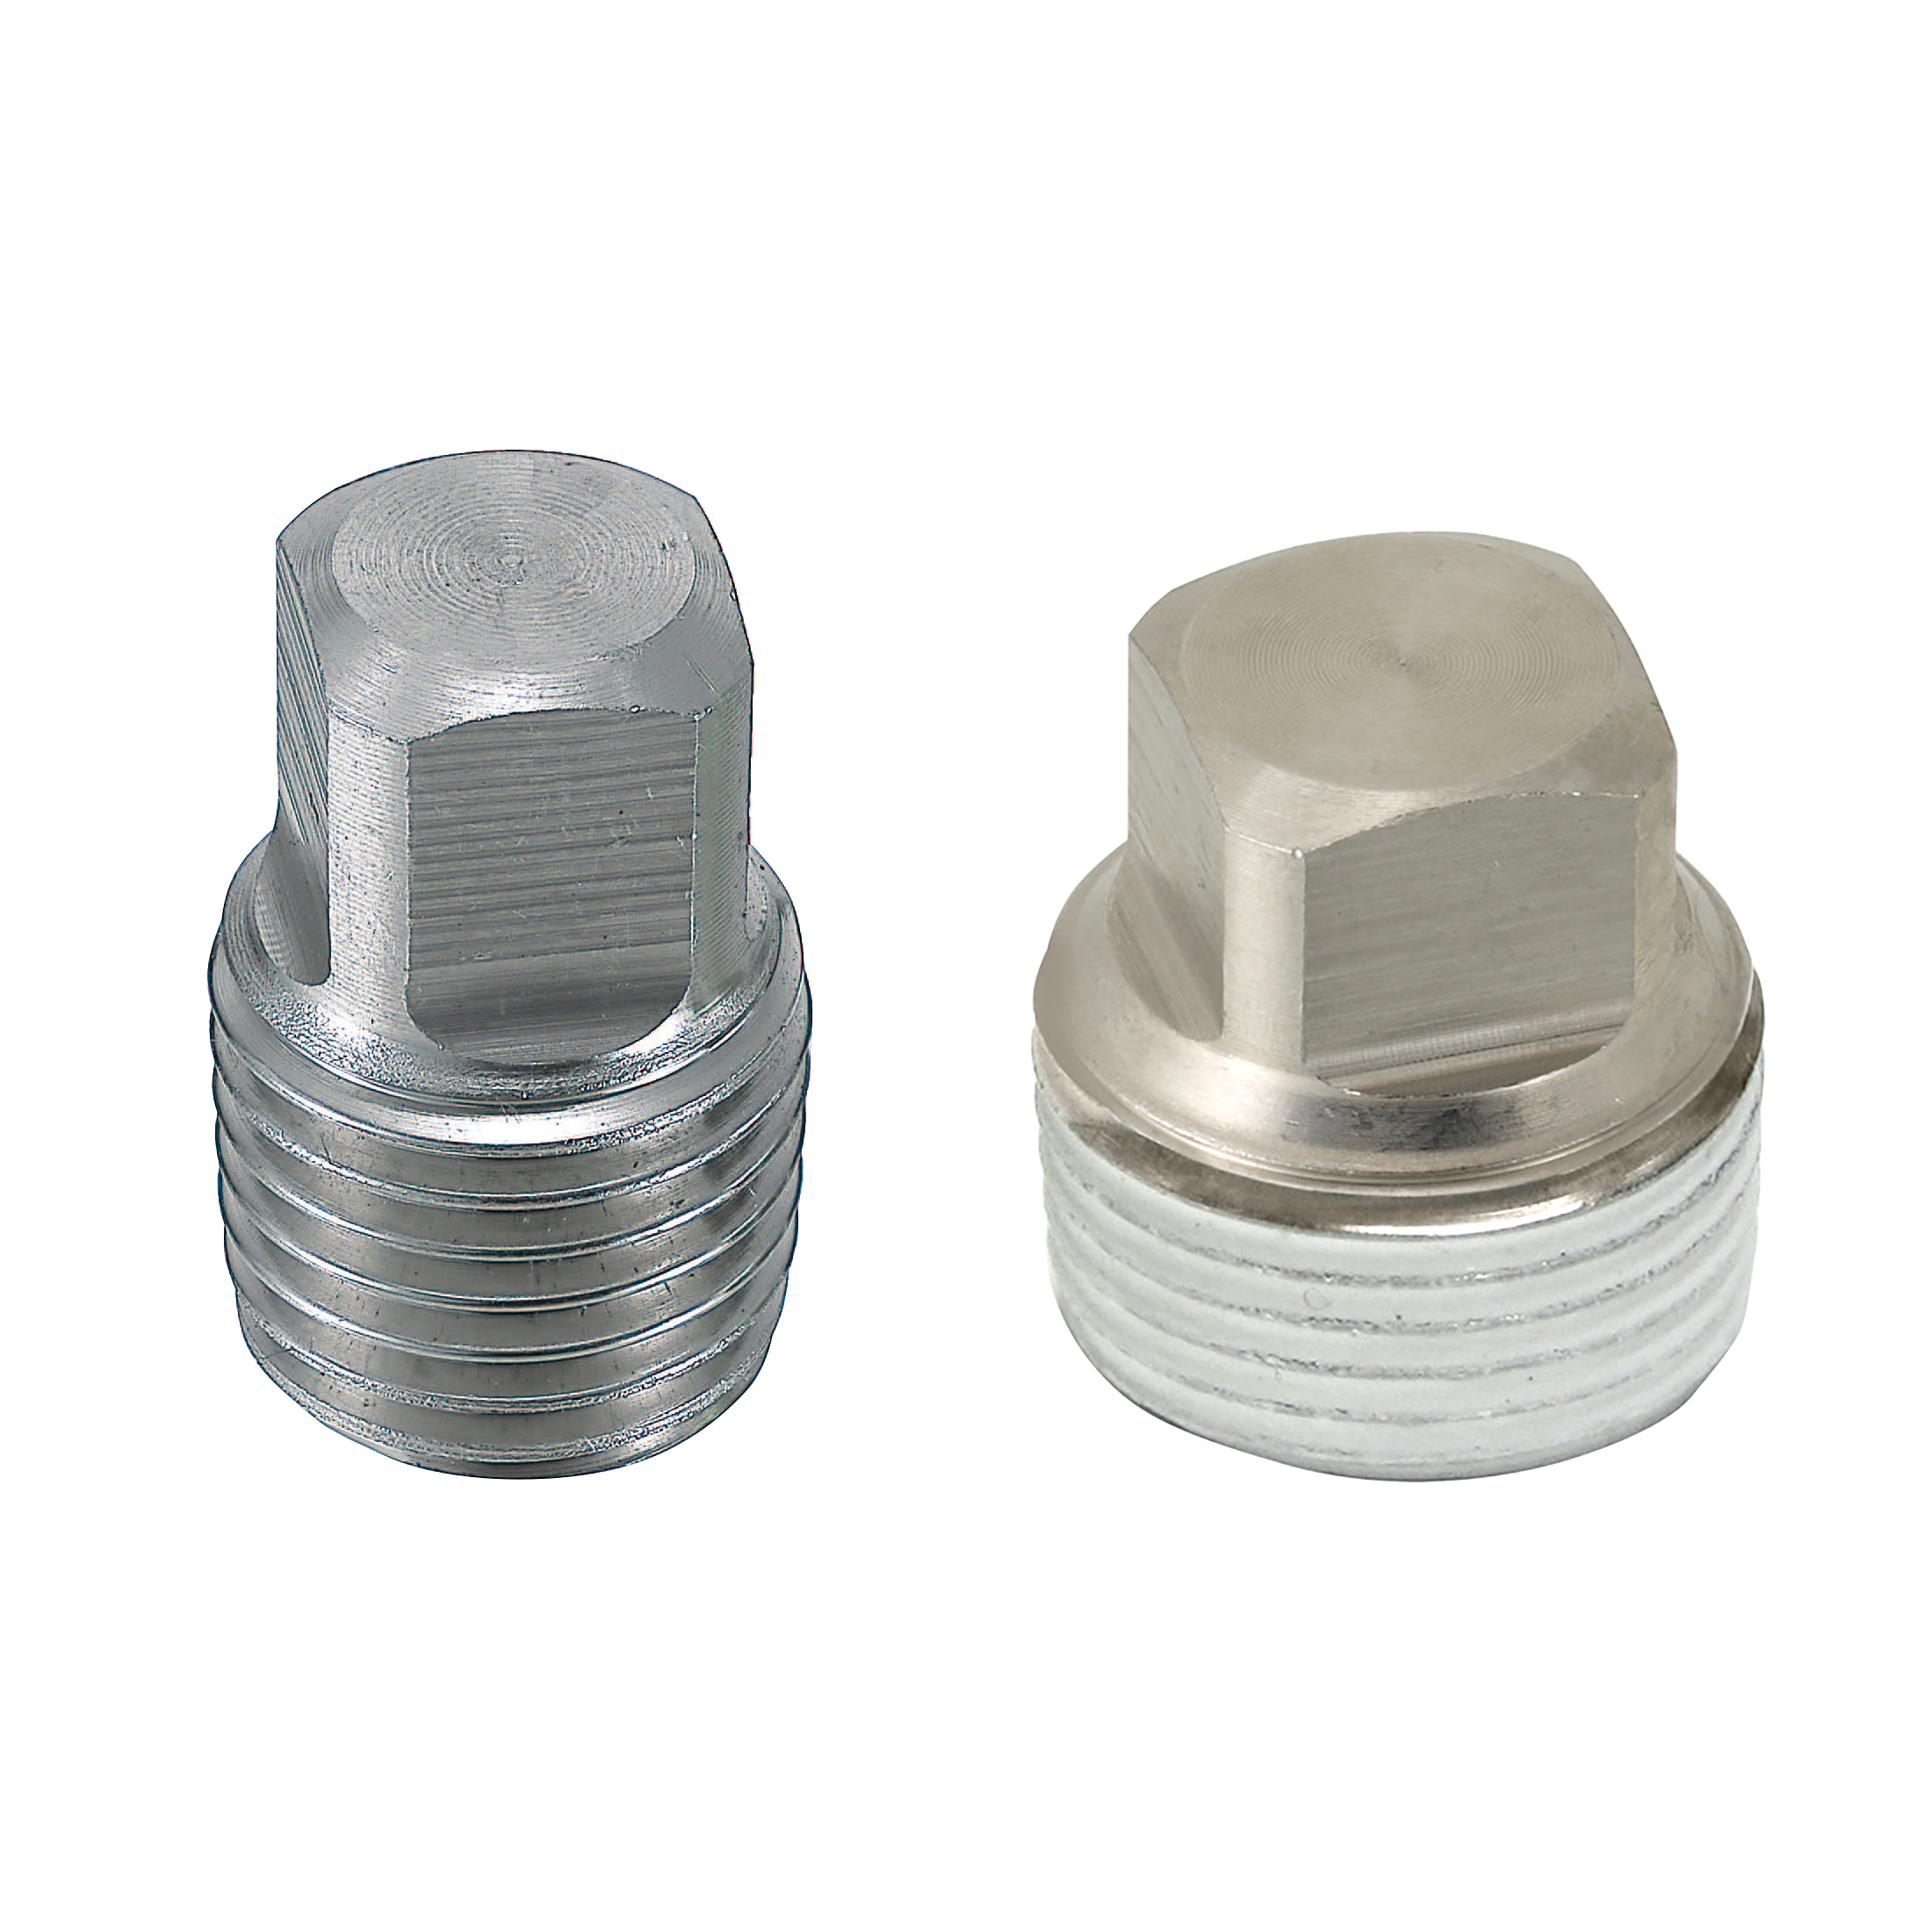 Pipe Fitting - Plug, Male, Threaded, Low Pressure